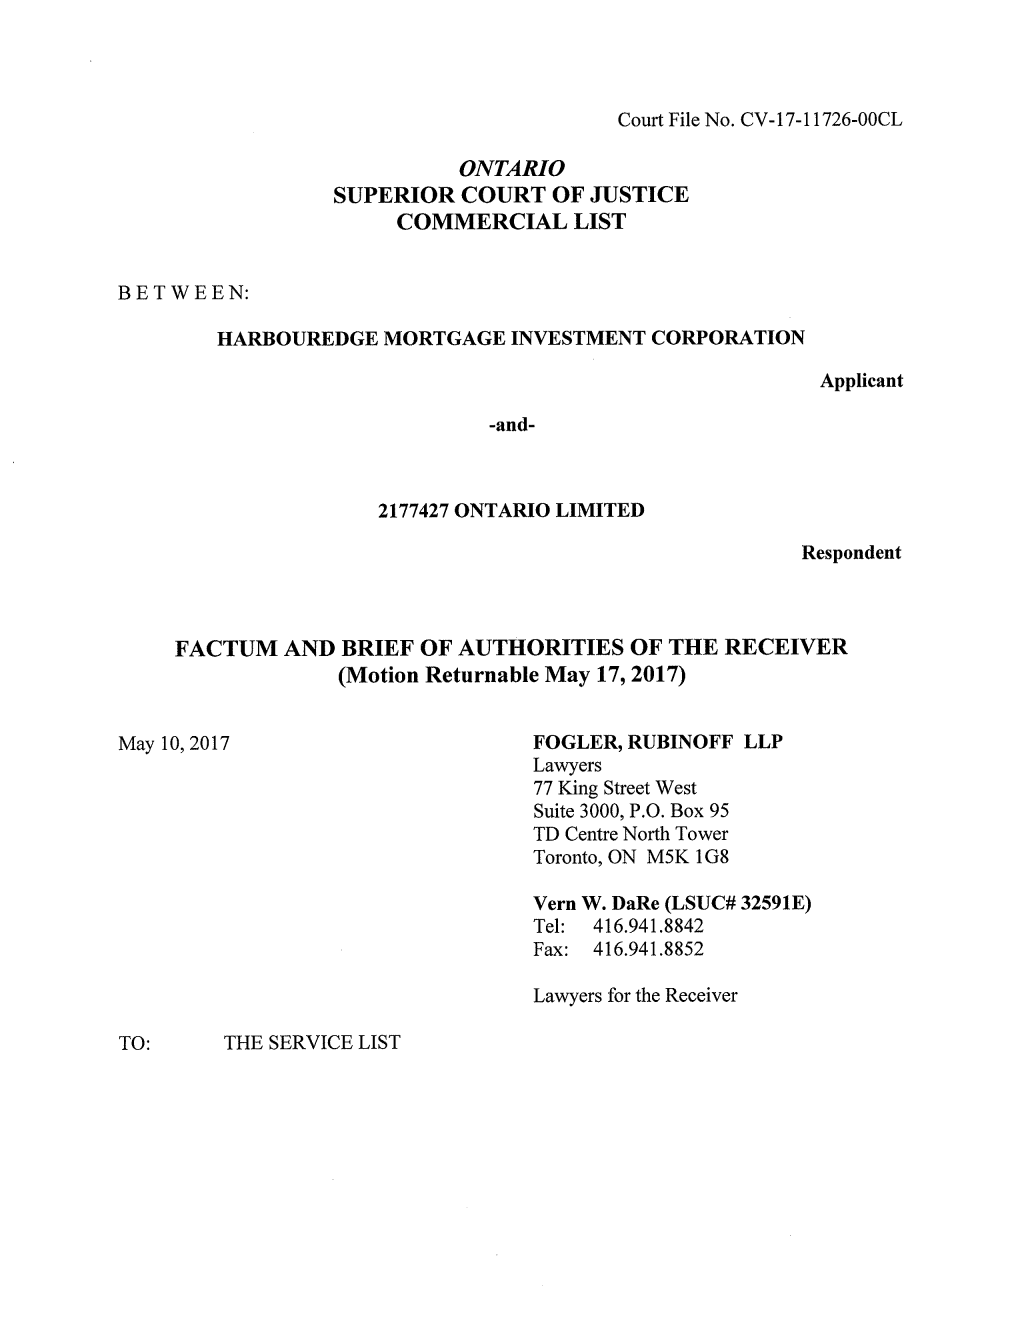 FACTUM and BRIEF of AUTHORITIES of the RECEIVER (Motion Returnable May 17, 2017)